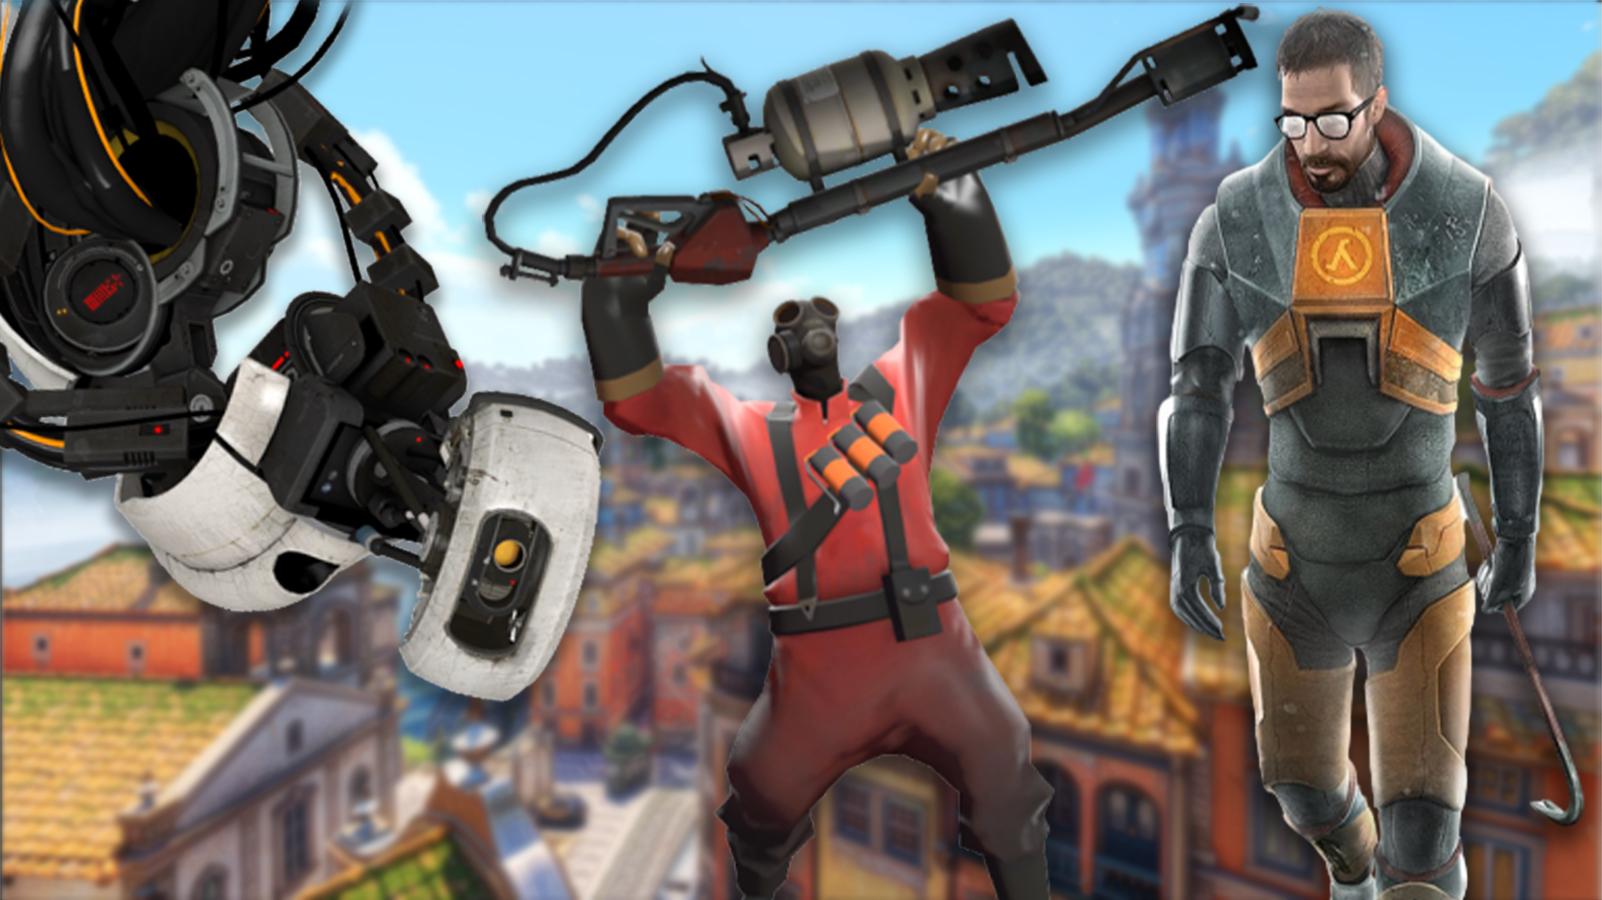 Overwatch 2 on Steam “opens the Valve” for potential crossovers, devs tease  - Dexerto